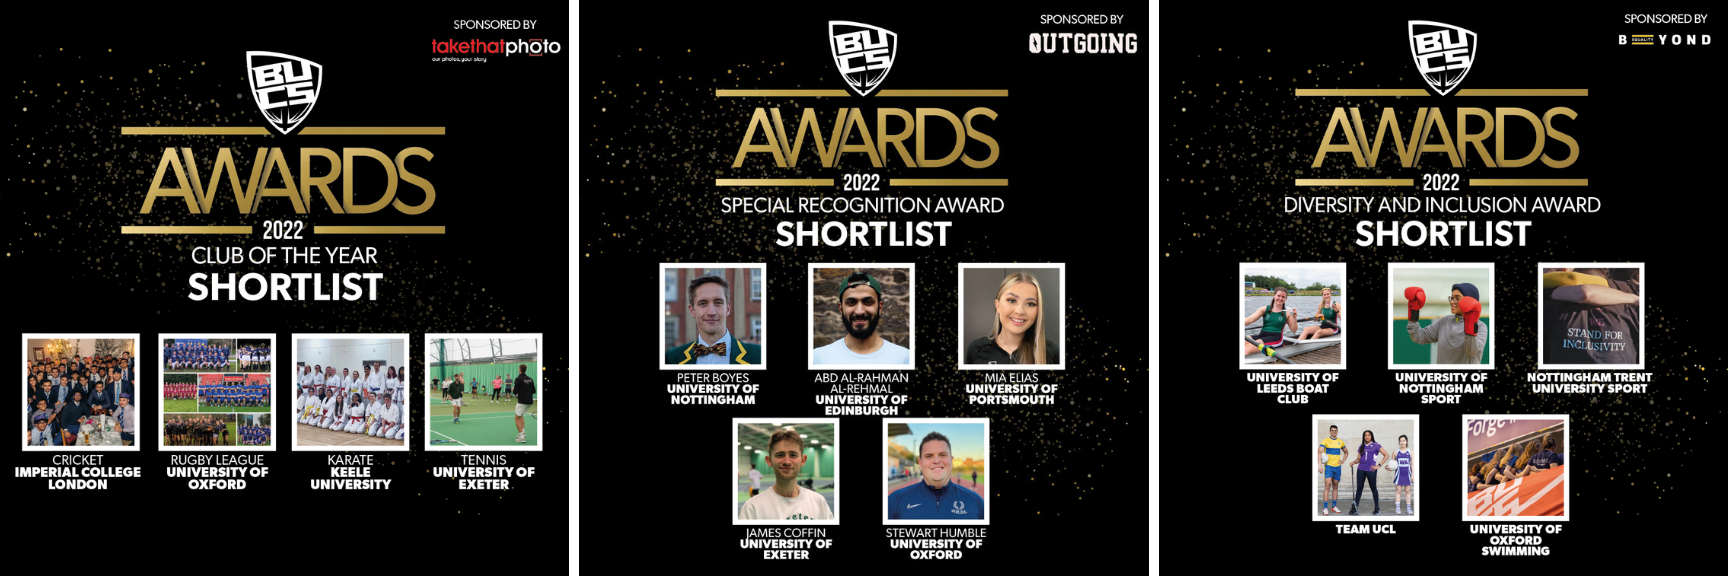 3 Graphics containing the BUCS Awards Shortlists for Oxford nominated clubs and athletes